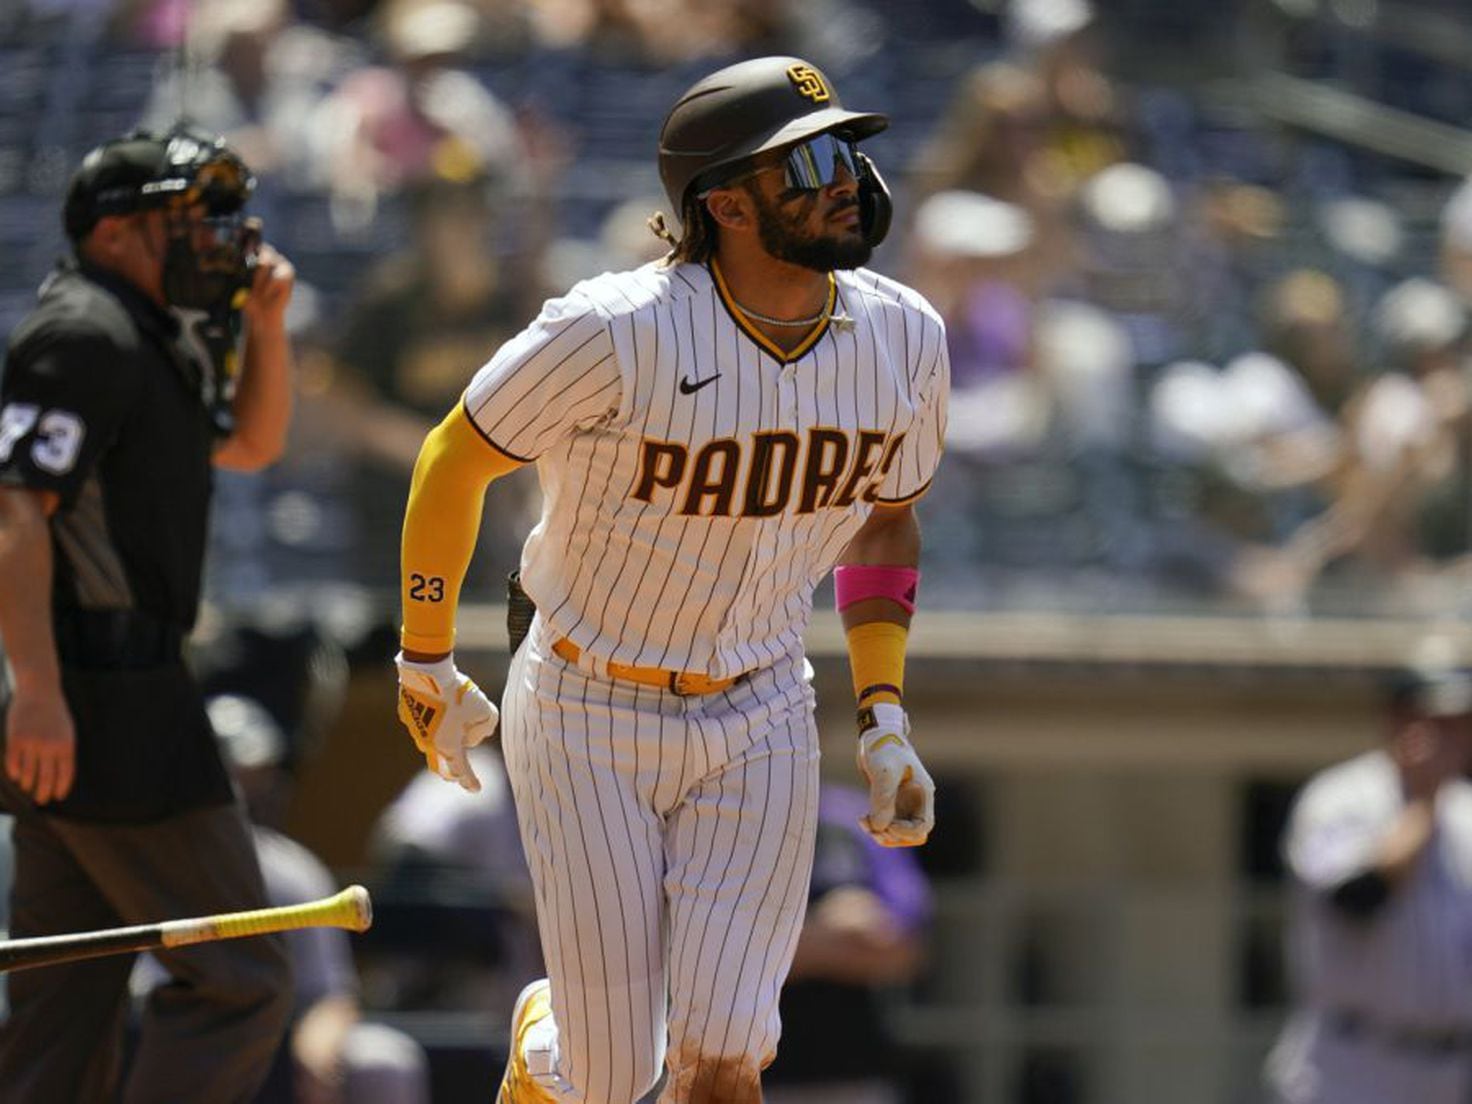 Padres News: Juan Soto Not Taking Games Off Until Batting Slumps End -  Sports Illustrated Inside The Padres News, Analysis and More